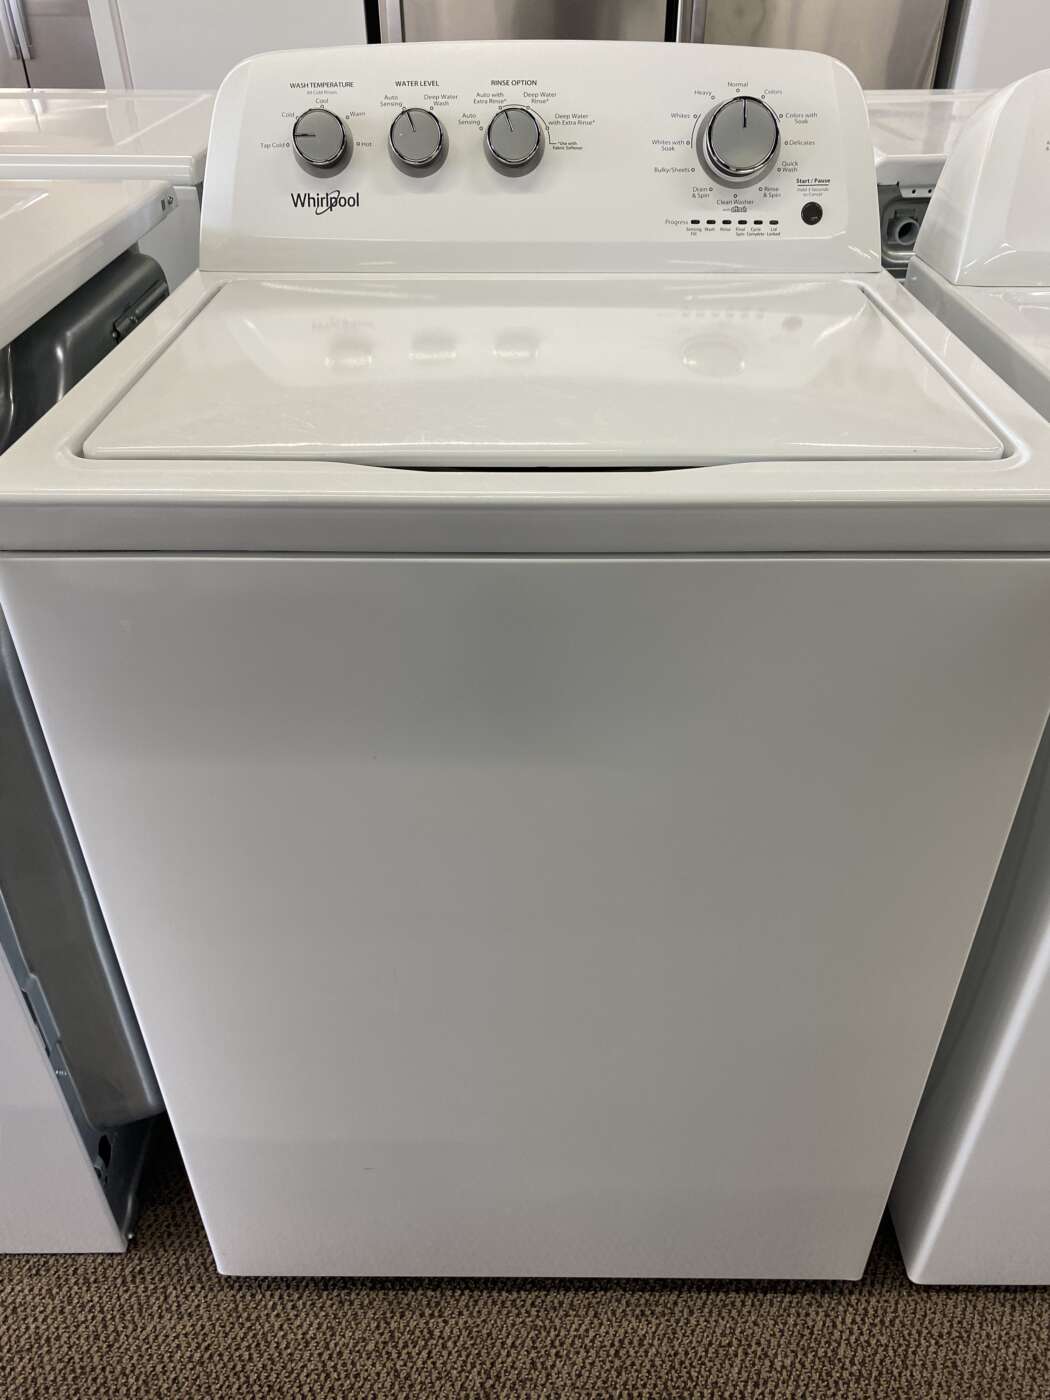 Reconditioned WHIRLPOOL 3.8 Cu. Ft. Top-Load Washer – White